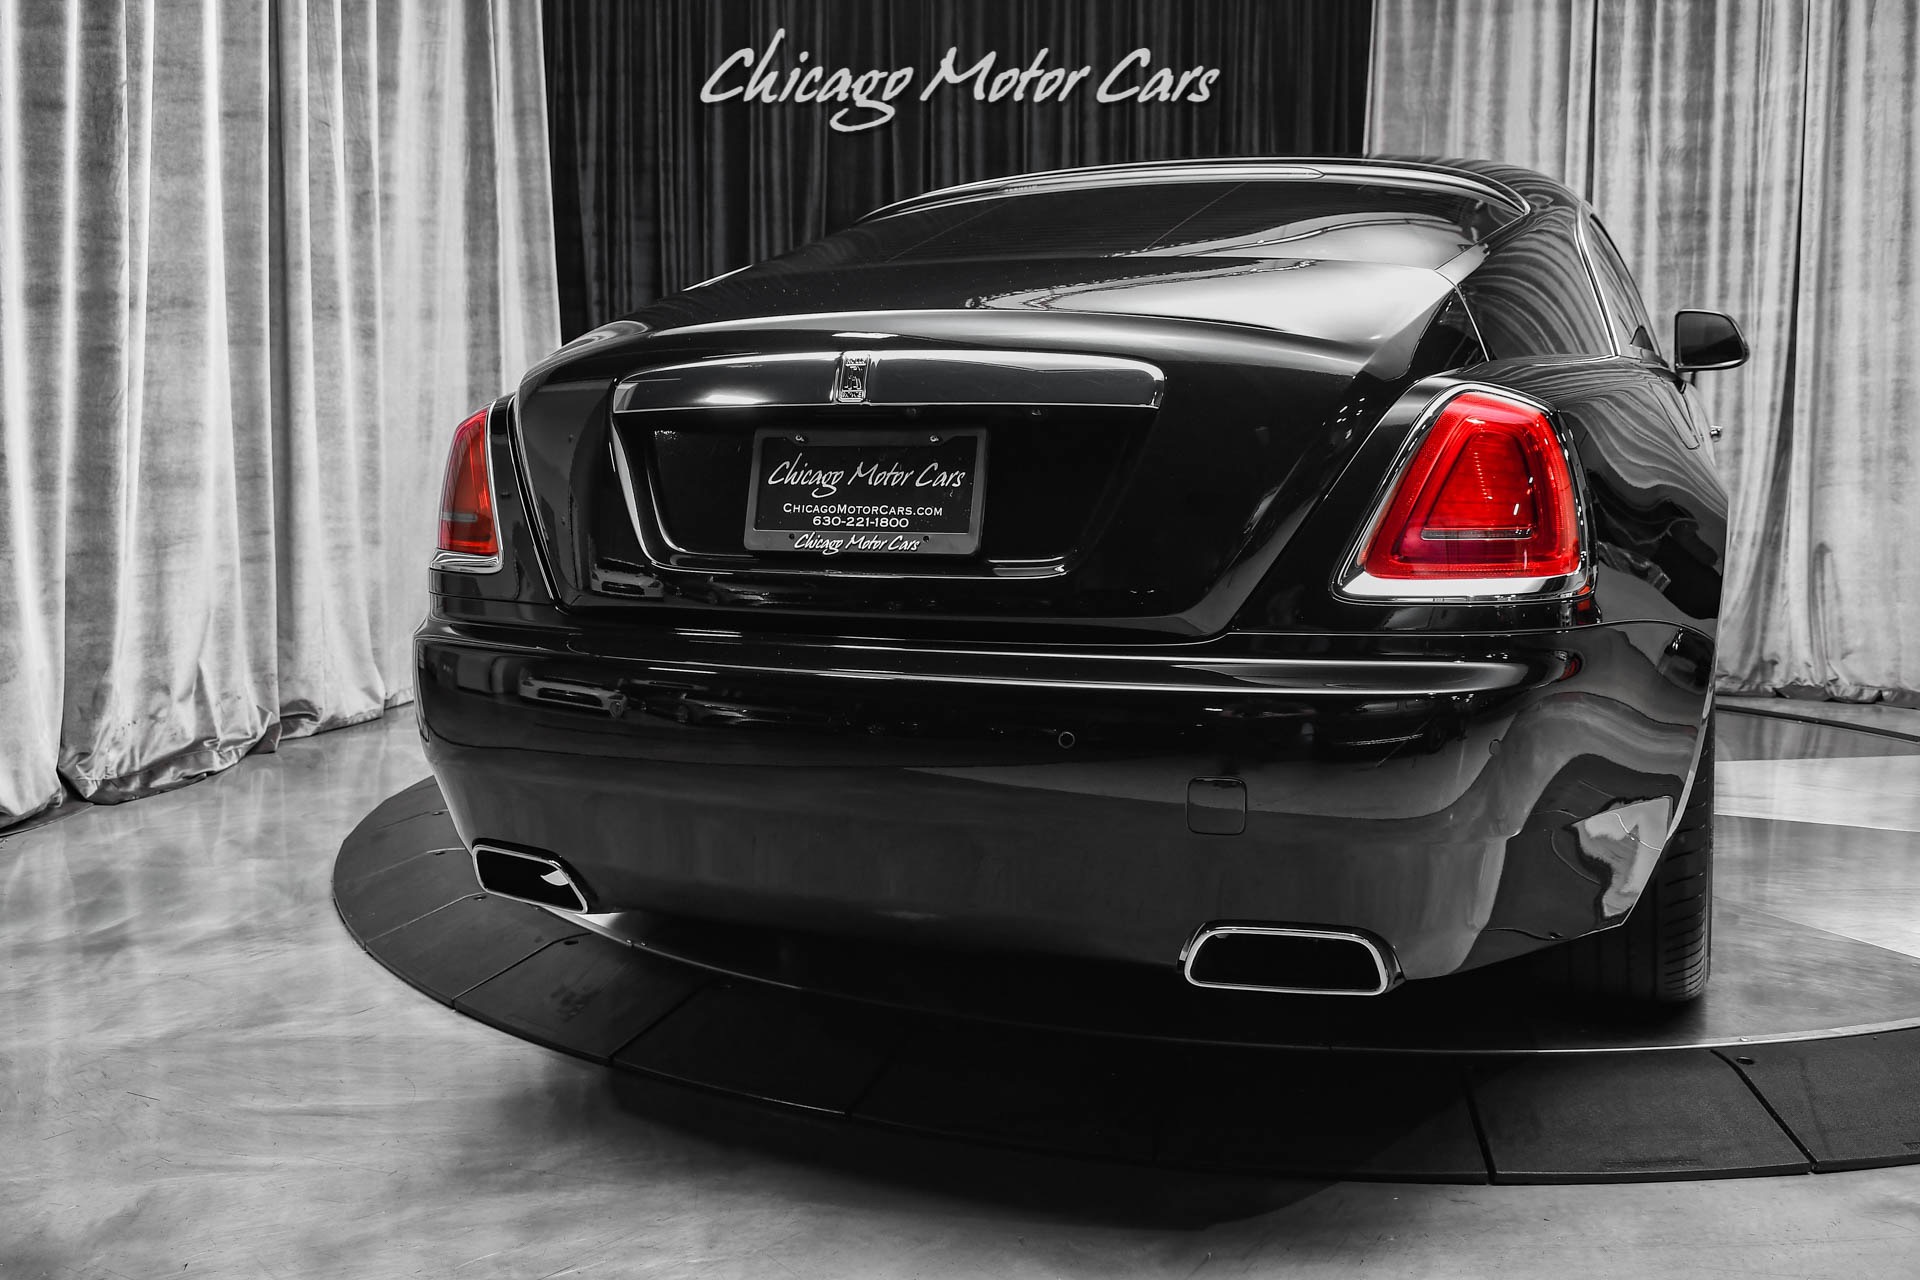 Used-2015-Rolls-Royce-Wraith-Coupe-Starlight-Only-15k-Miles-Active-Warranty-Just-Serviced